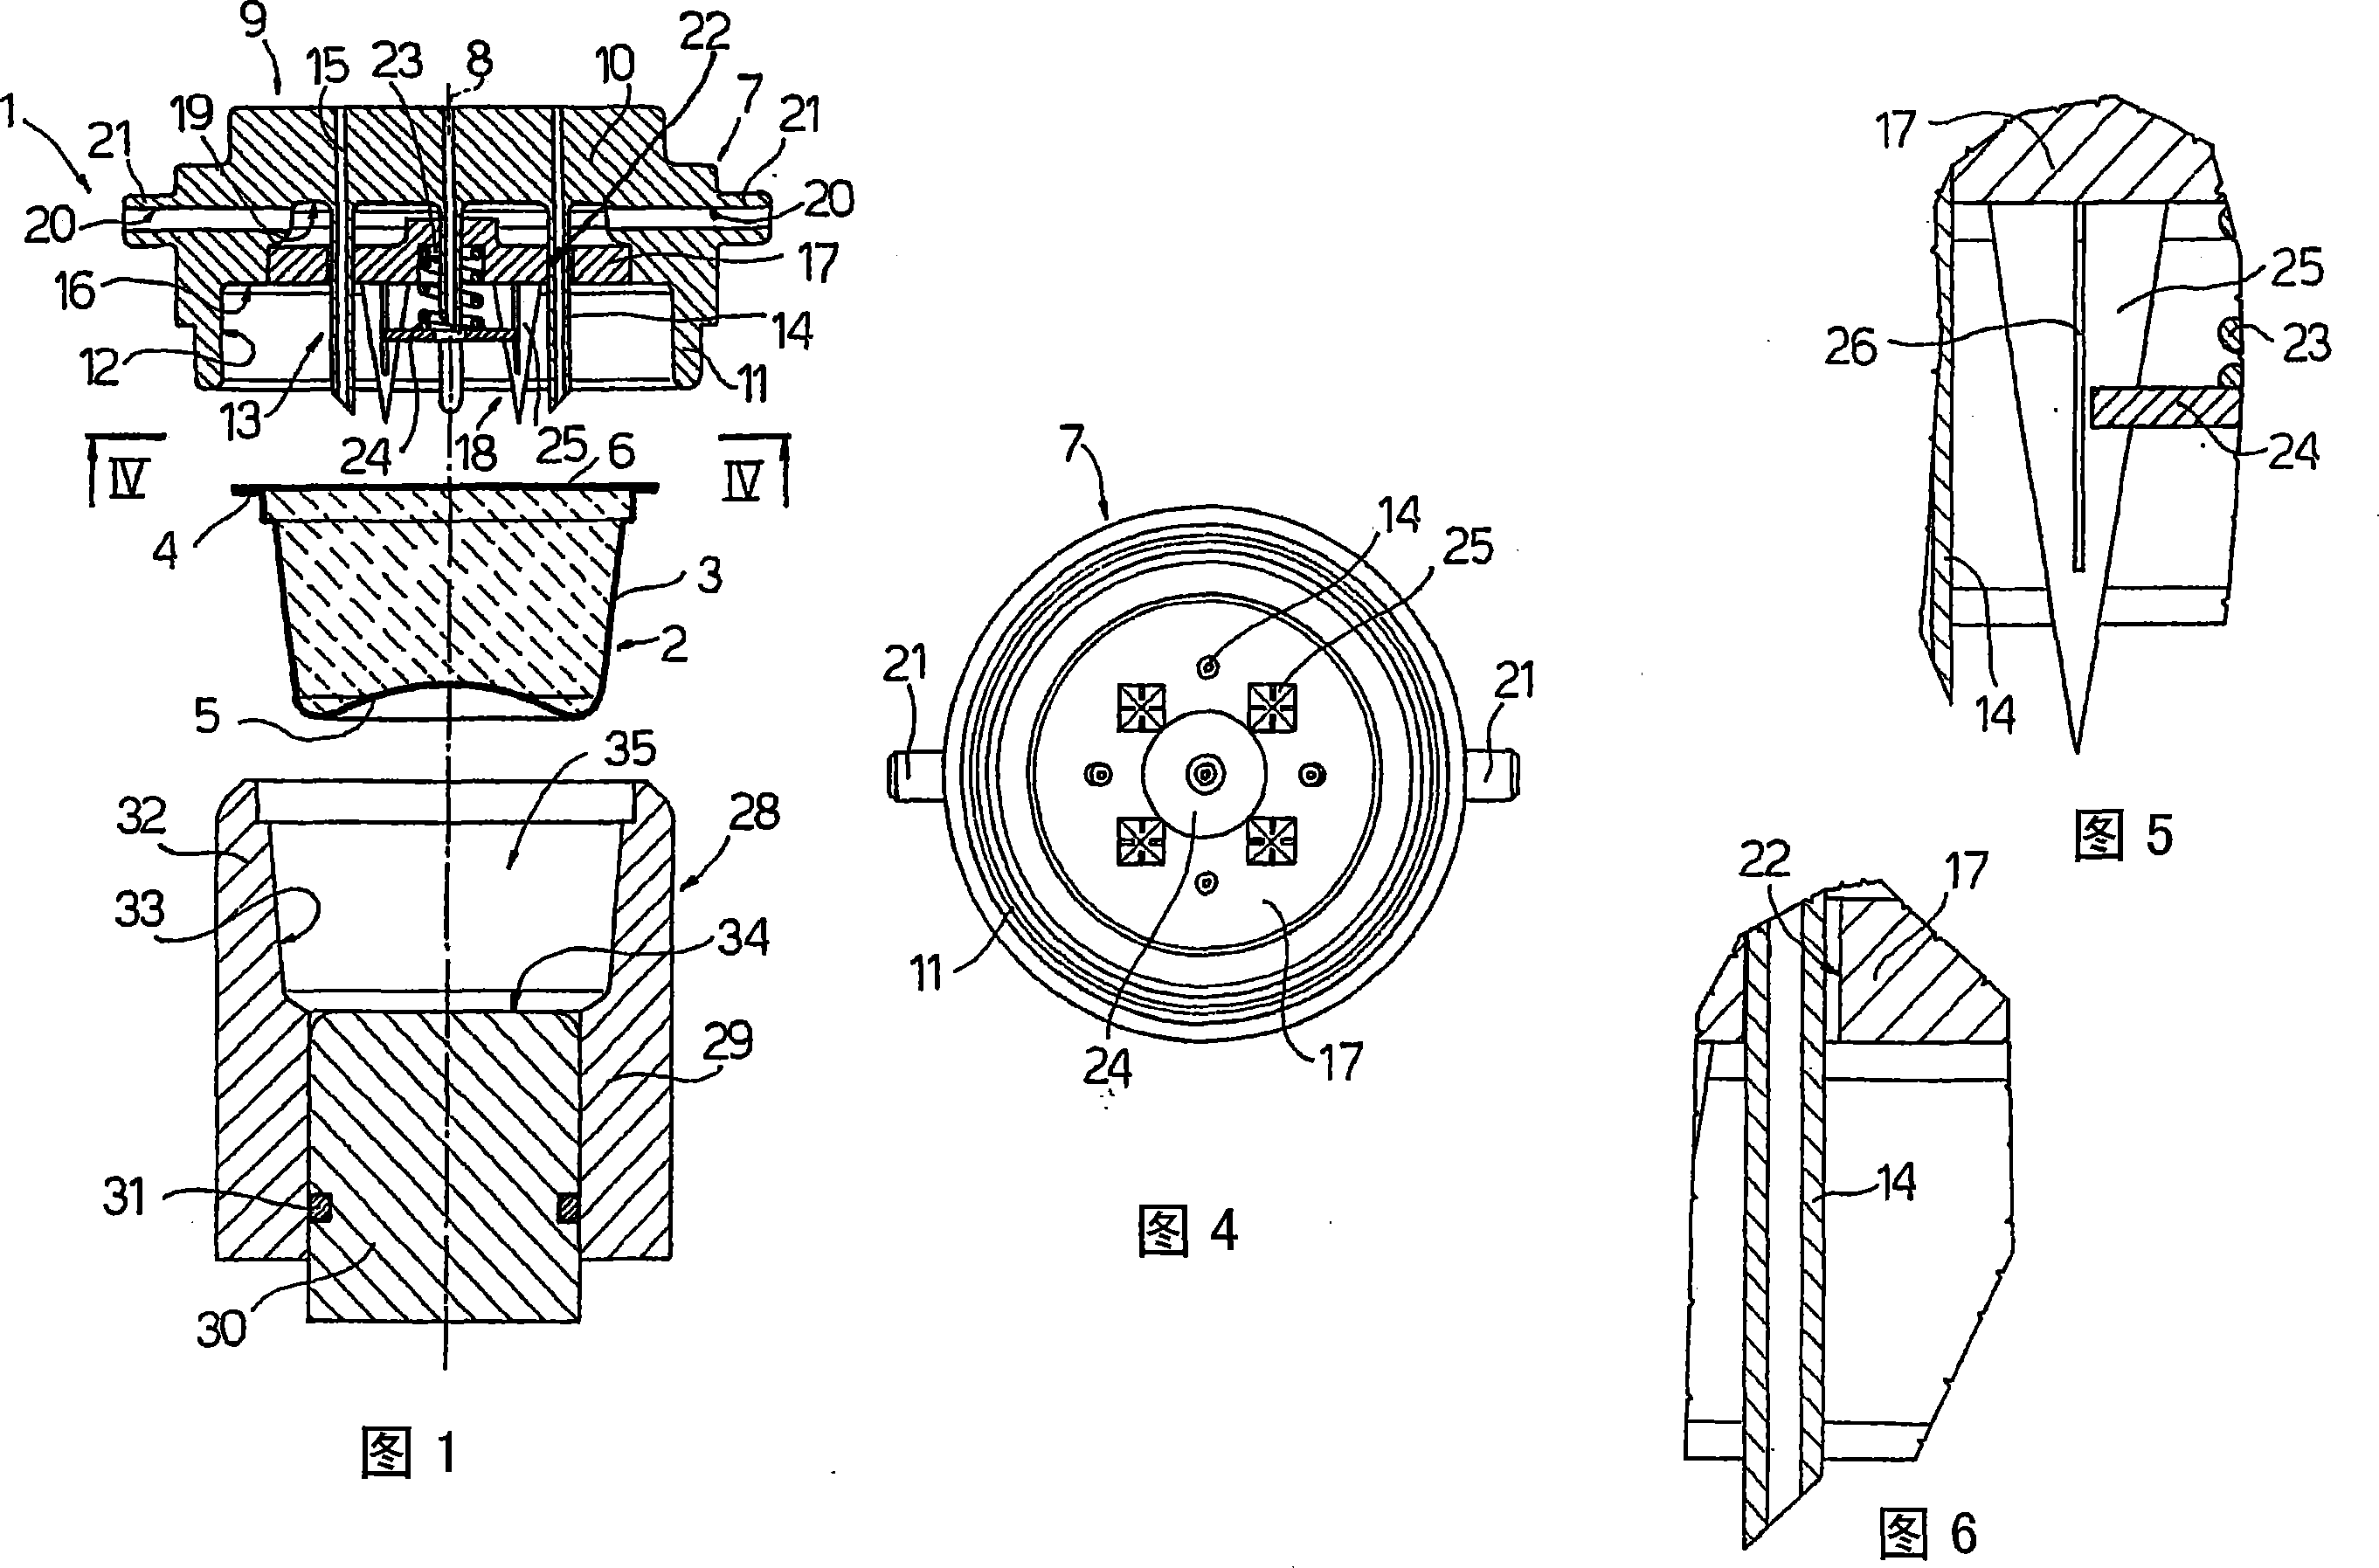 Infusion method and device for selectively producing american and espresso coffee from the same capsule of ground coffee